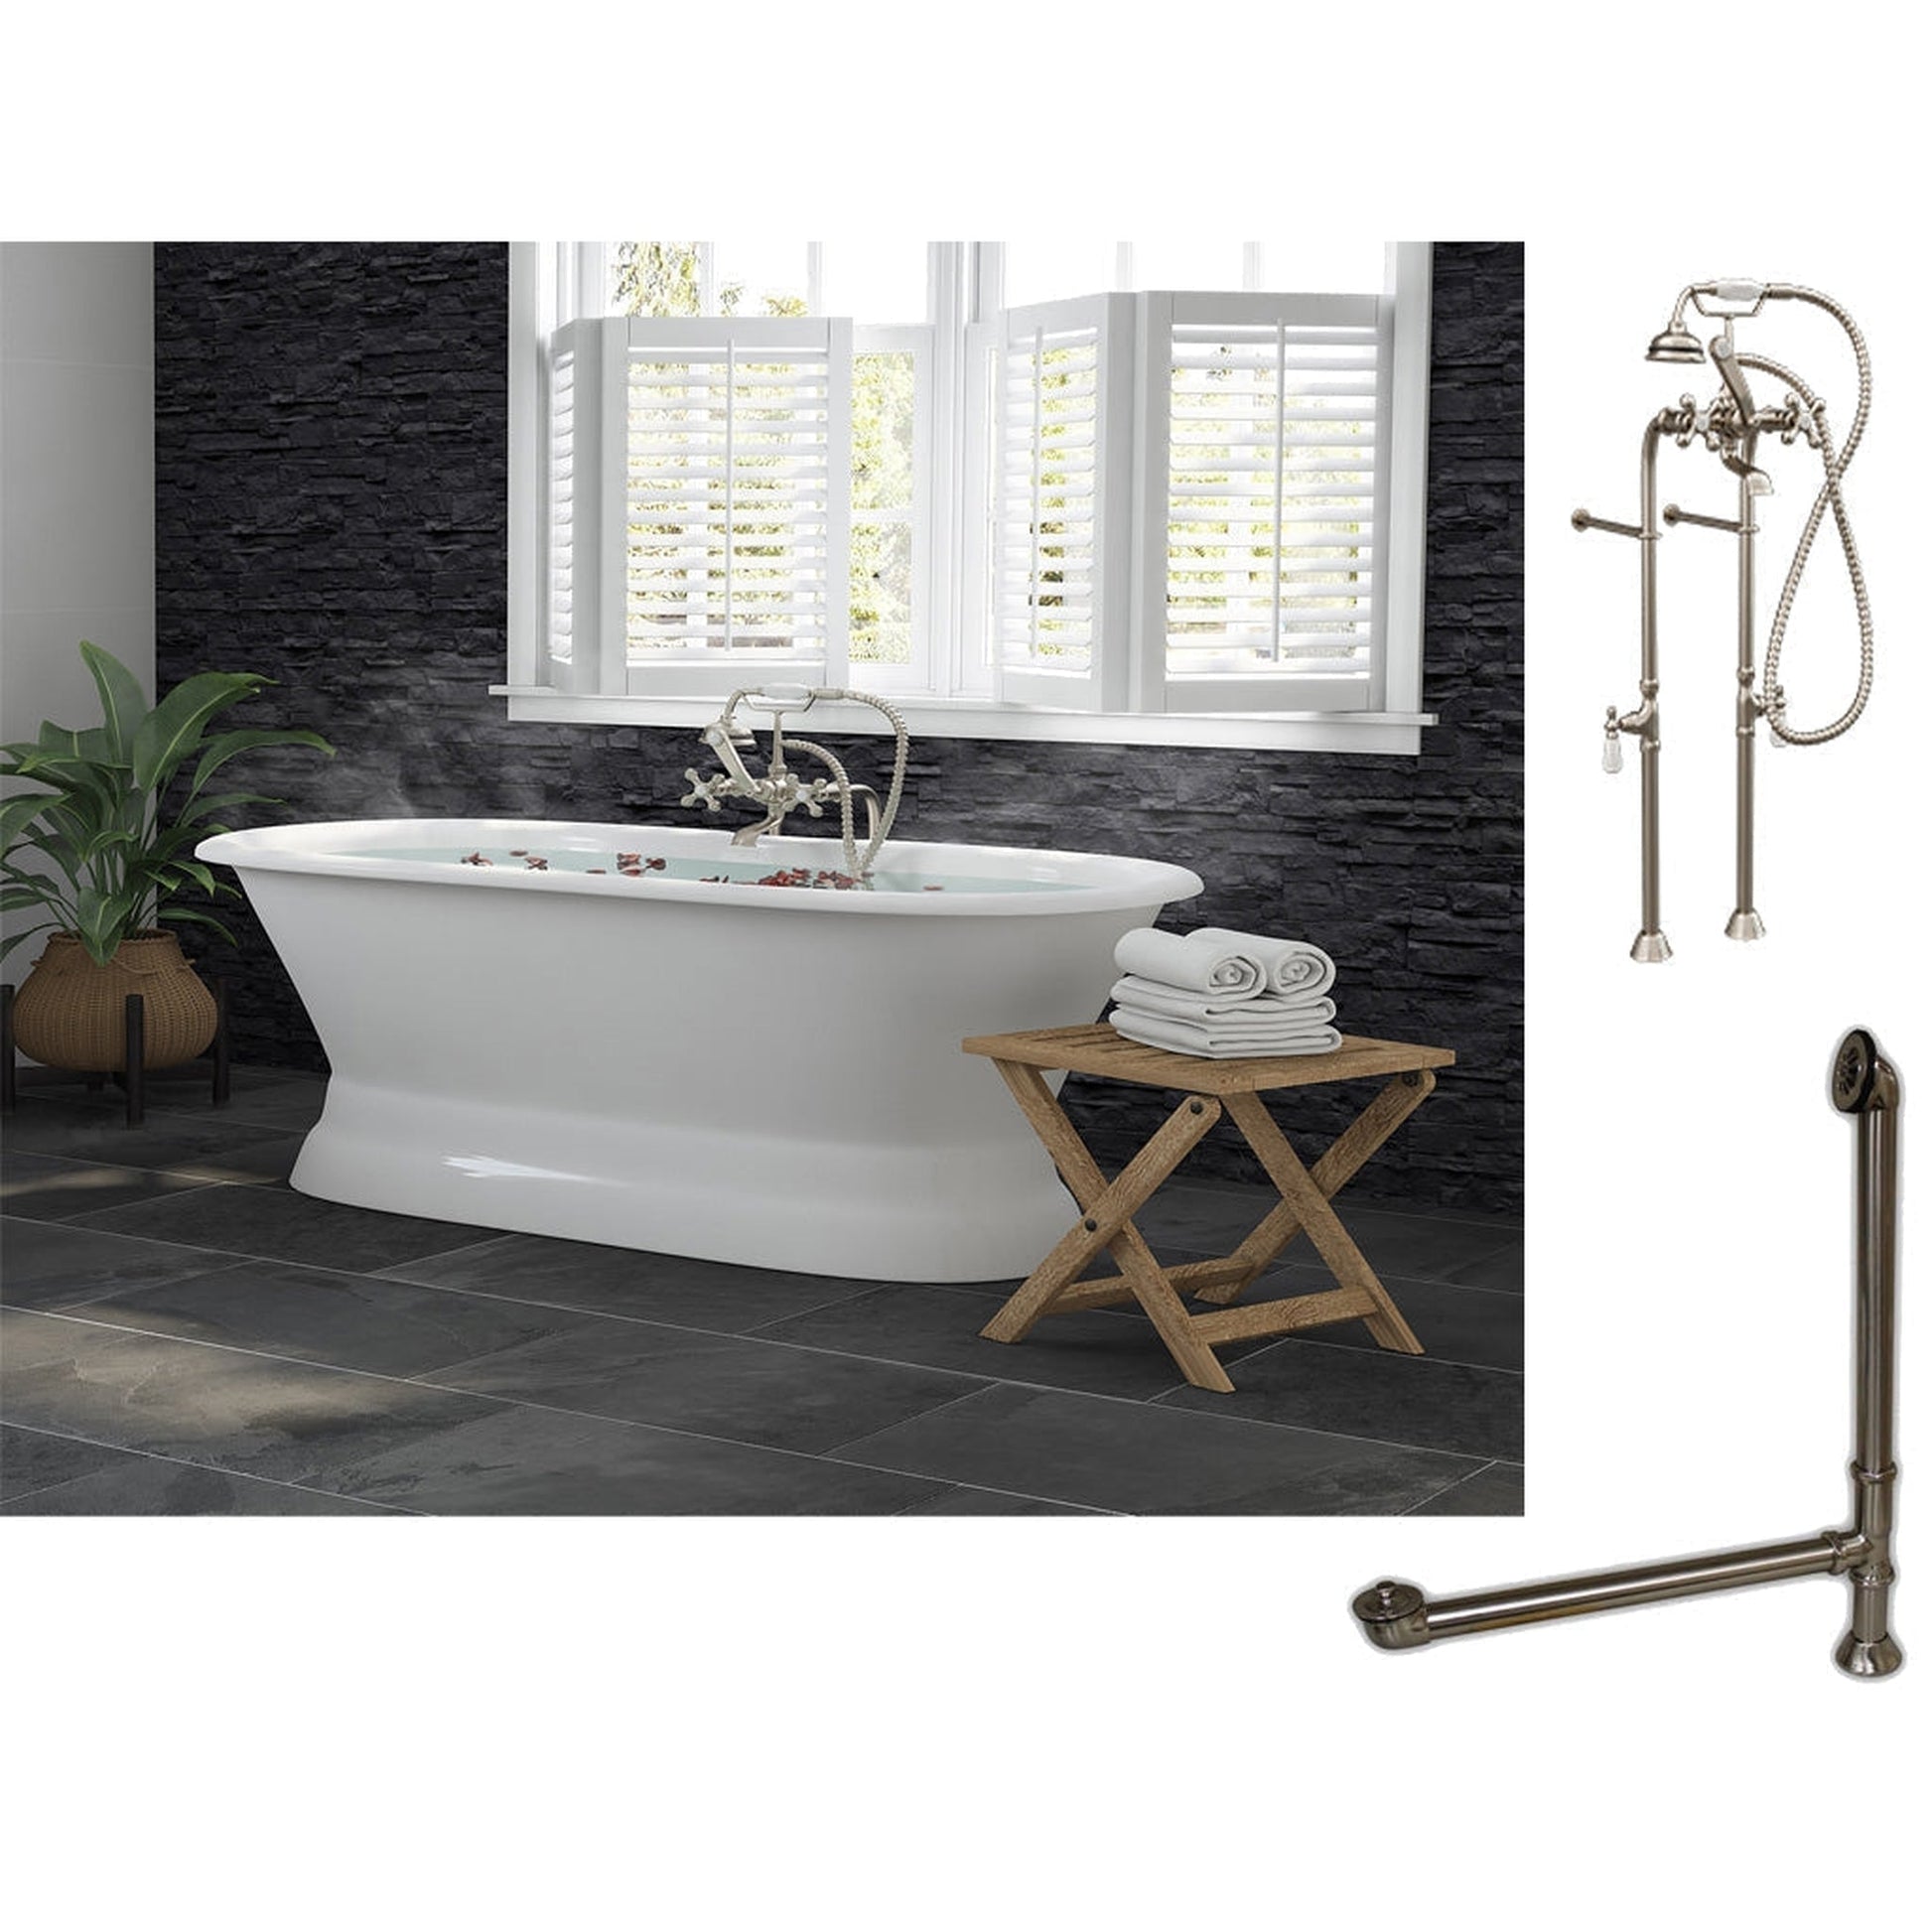 Cambridge Plumbing 66" White Cast Iron Double Ended Pedestal Bathtub With No Deck Holes And Complete Plumbing Package Including Floor Mounted British Telephone Faucet, Drain And Overflow Assembly In Brushed Nickel